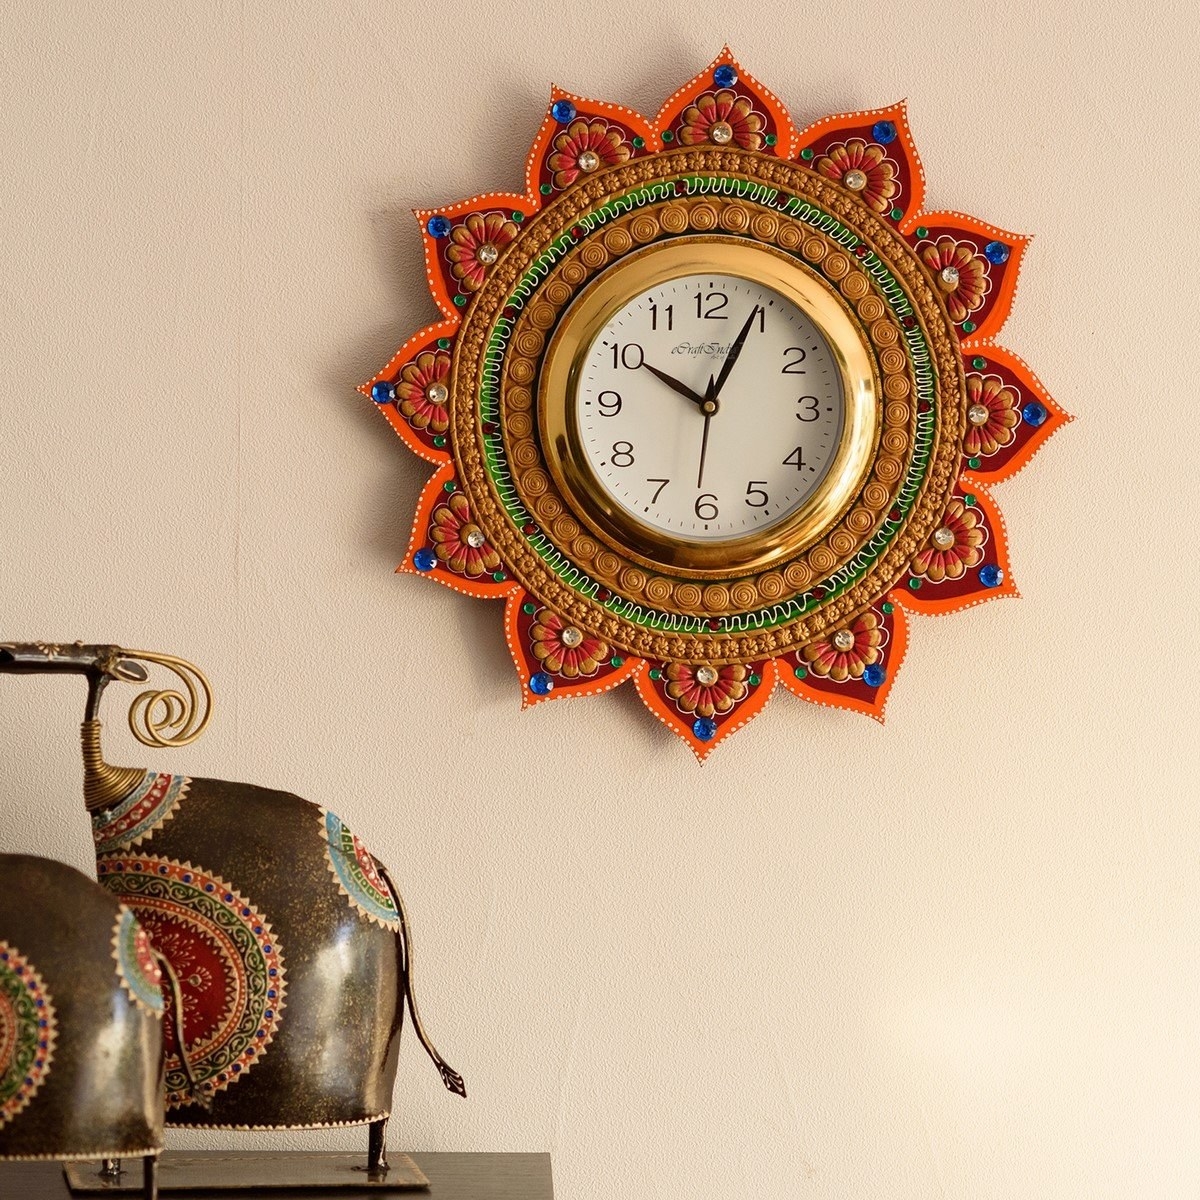 A wall clock with a floral pattern on it on the wall